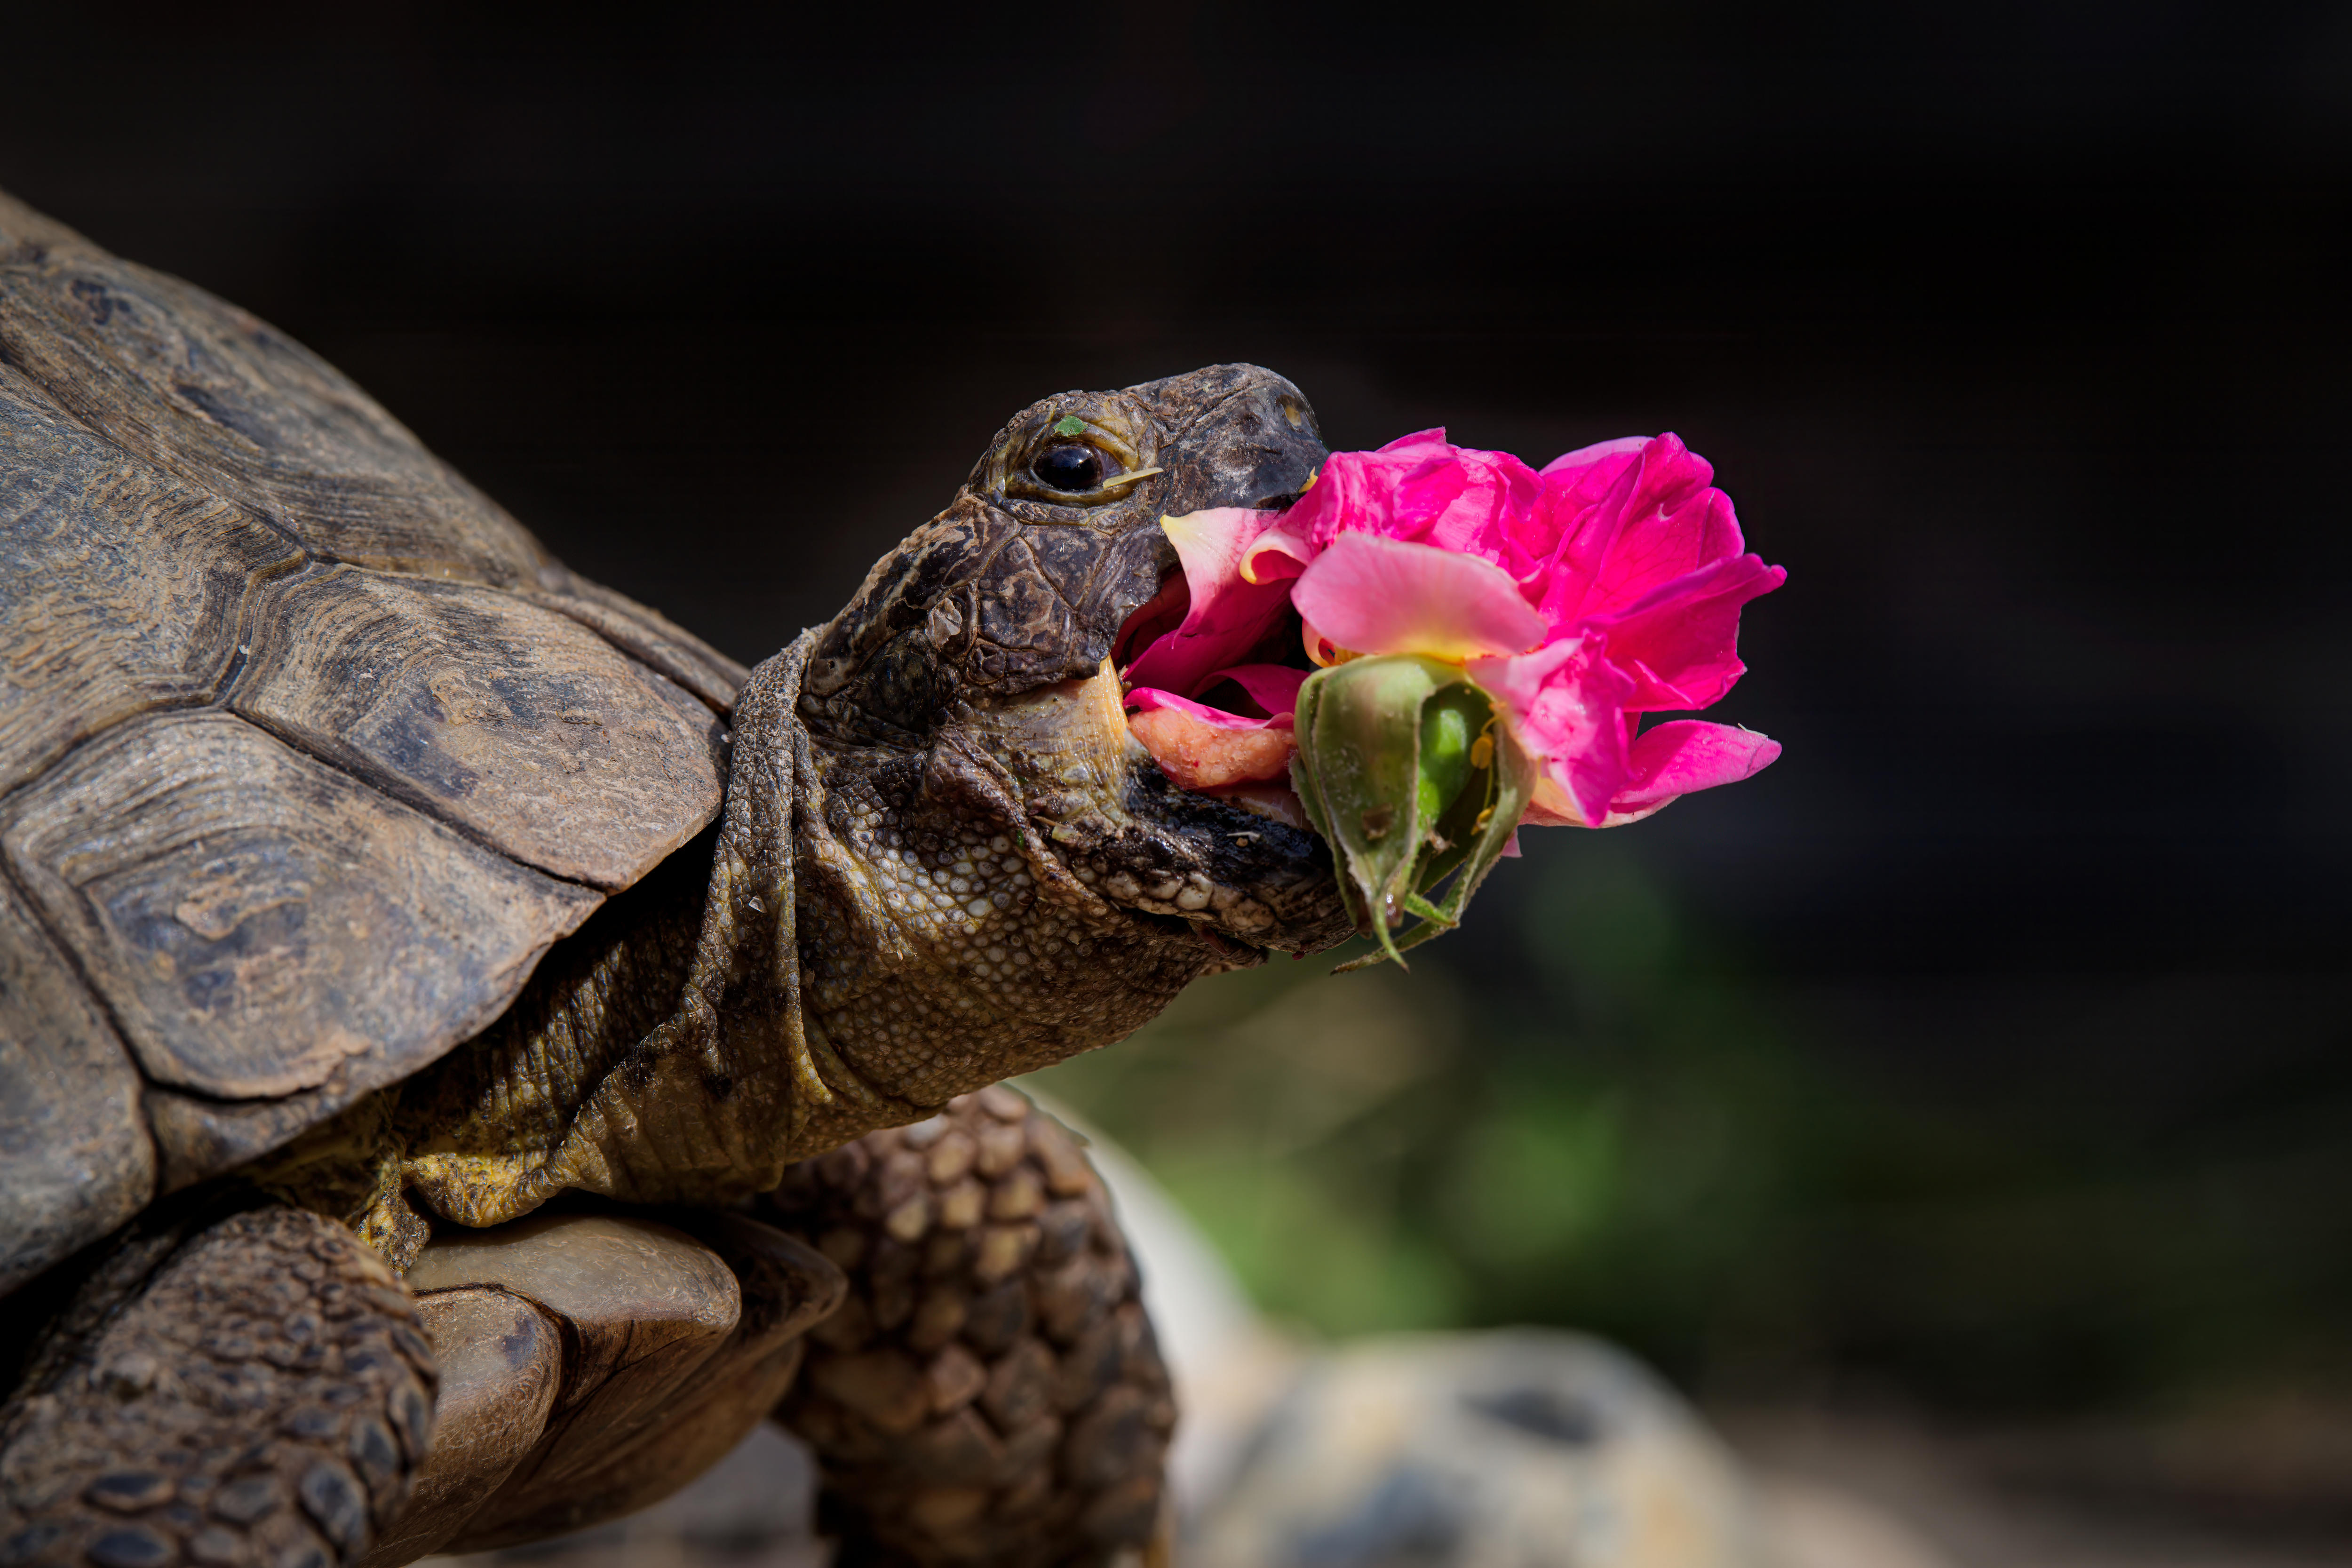 A tortoise eating a pink flower